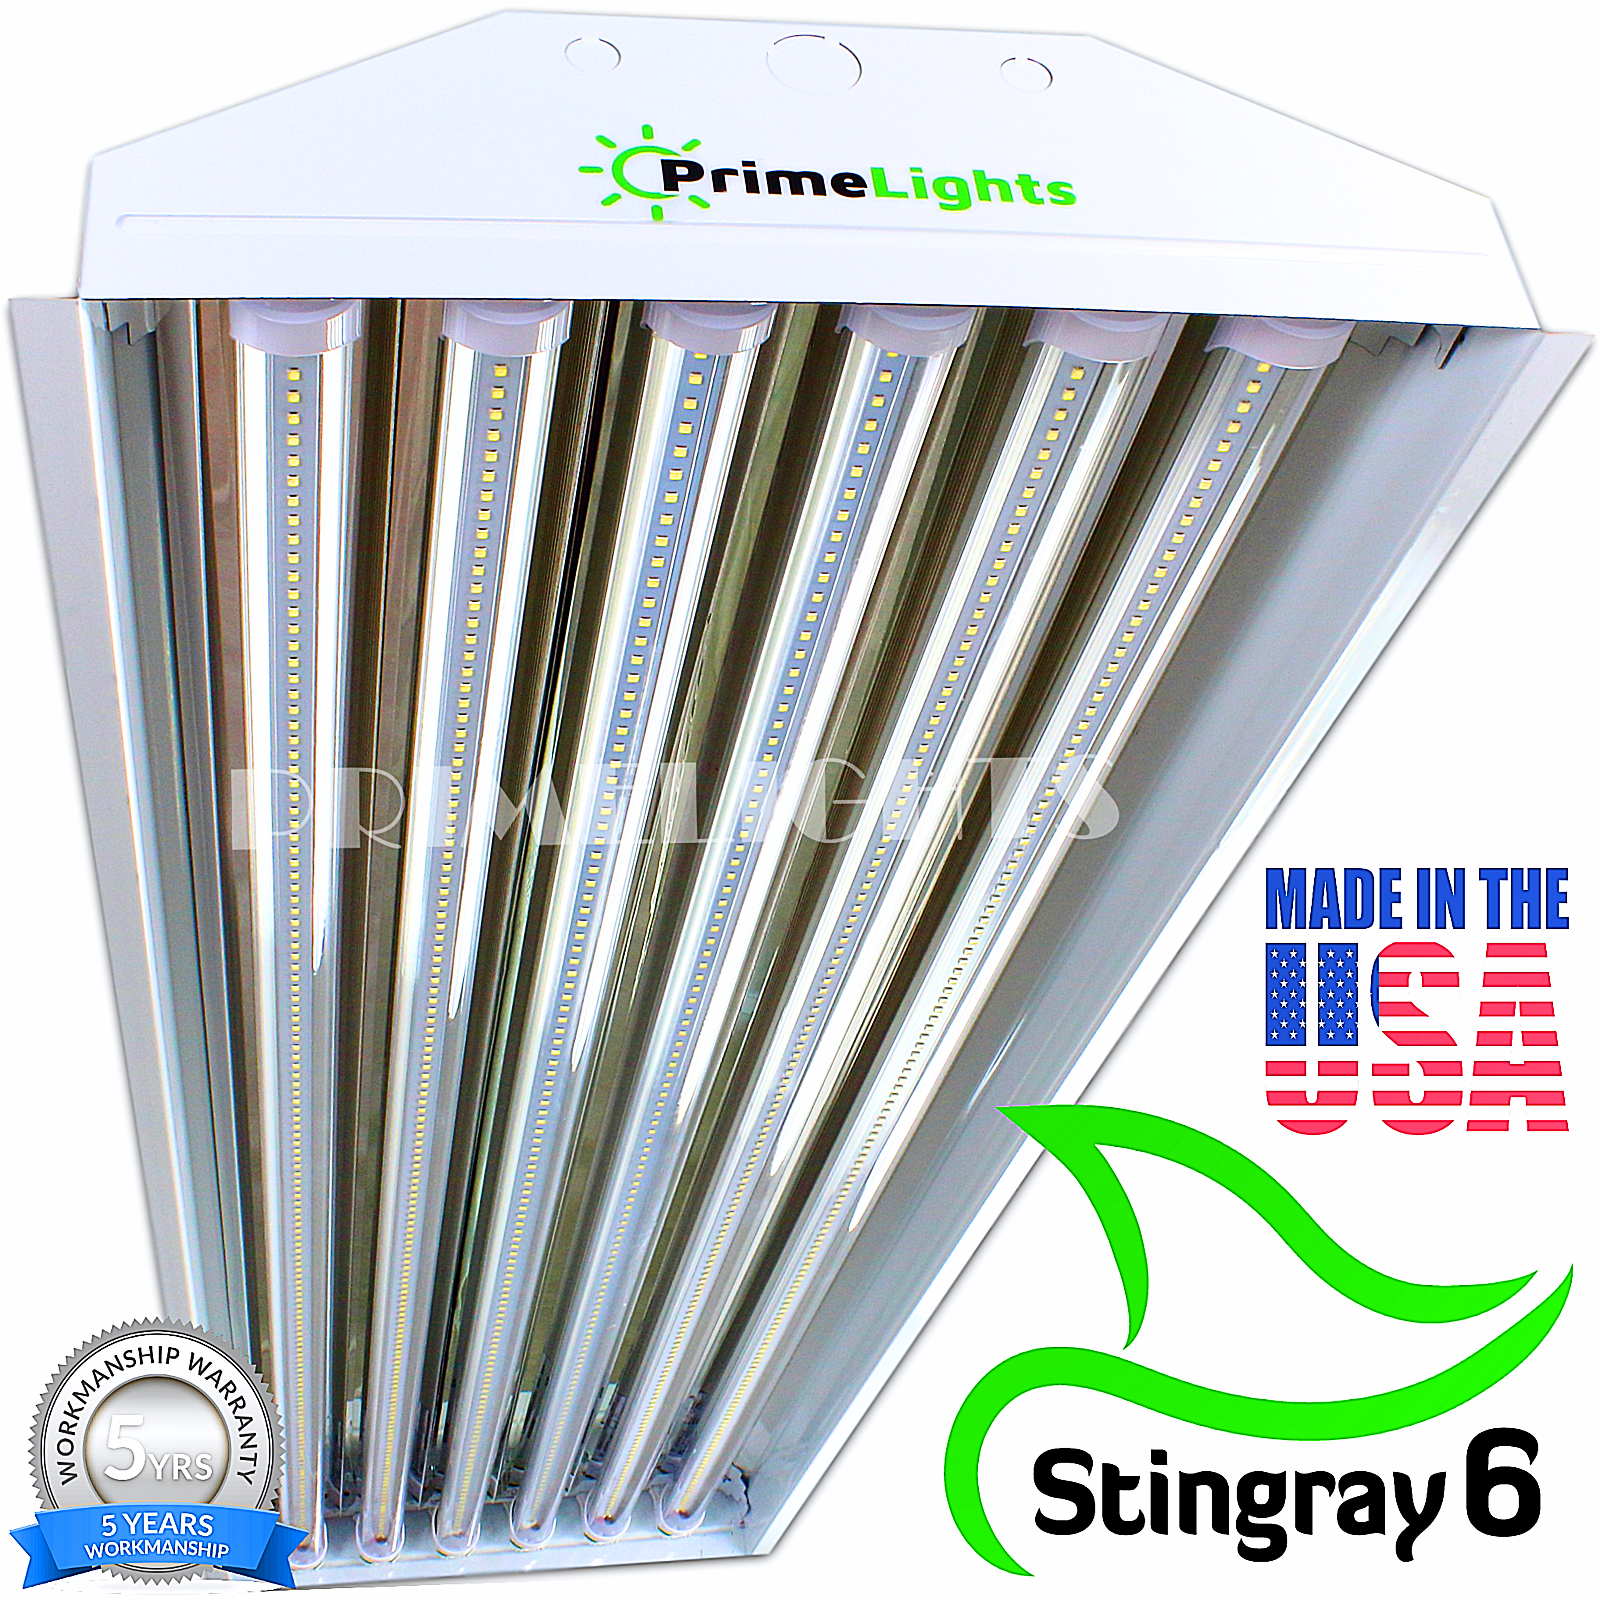 Led High Bay Light Usa Made Stingray 6 Brightest Durable Shop Light Max Coverage